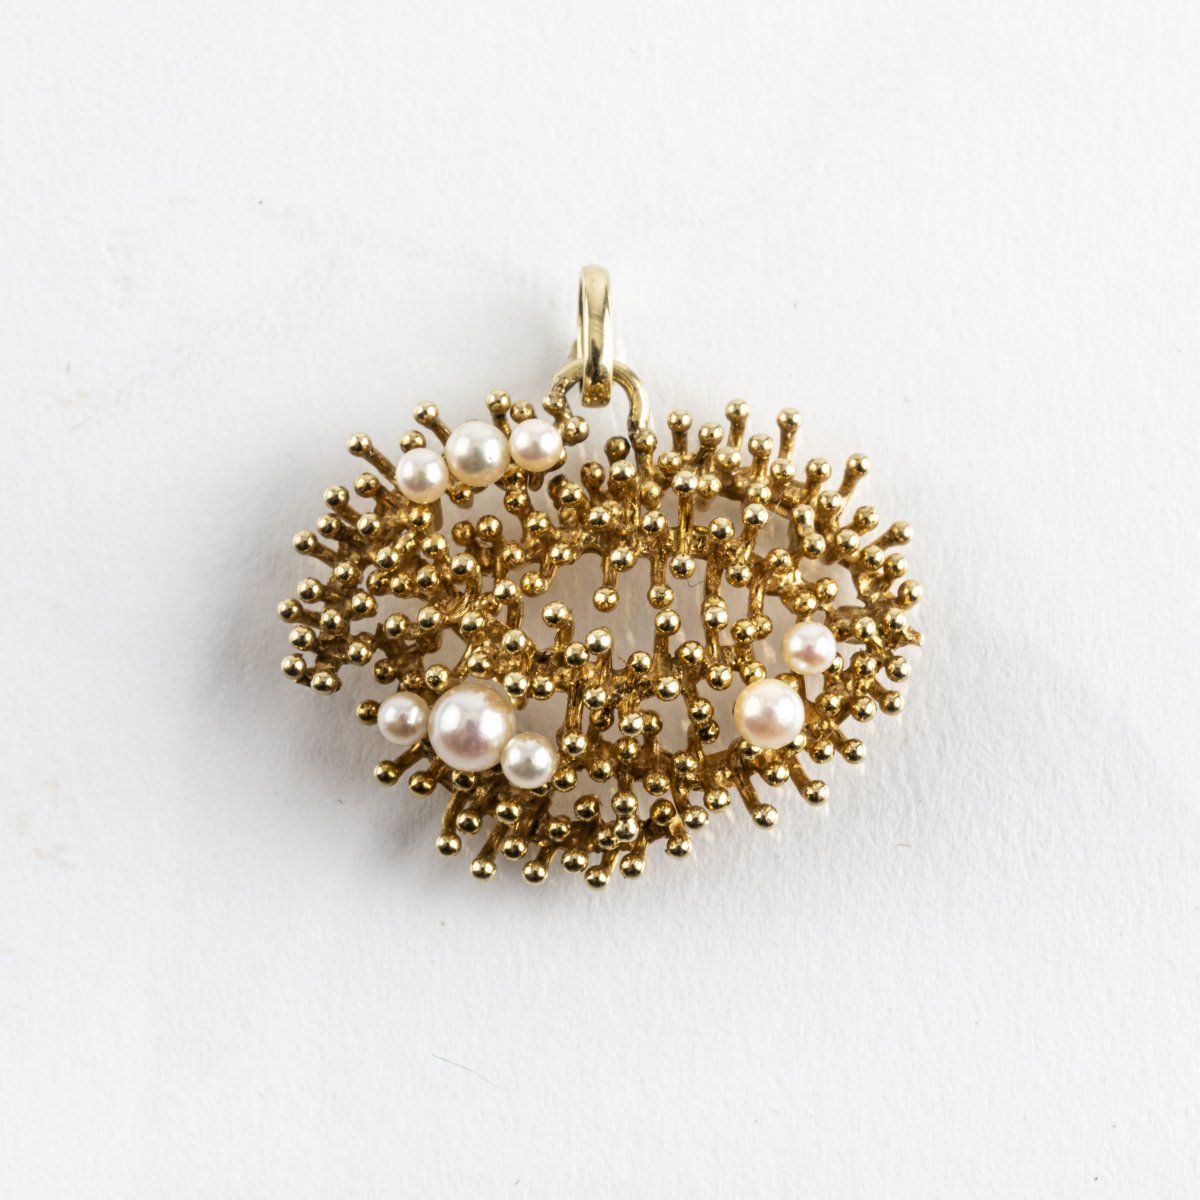 Null Germany, Pendant, 1960s, 585 yellow gold, pearls. 10.62 grams. 29 x 35 mm. &hellip;